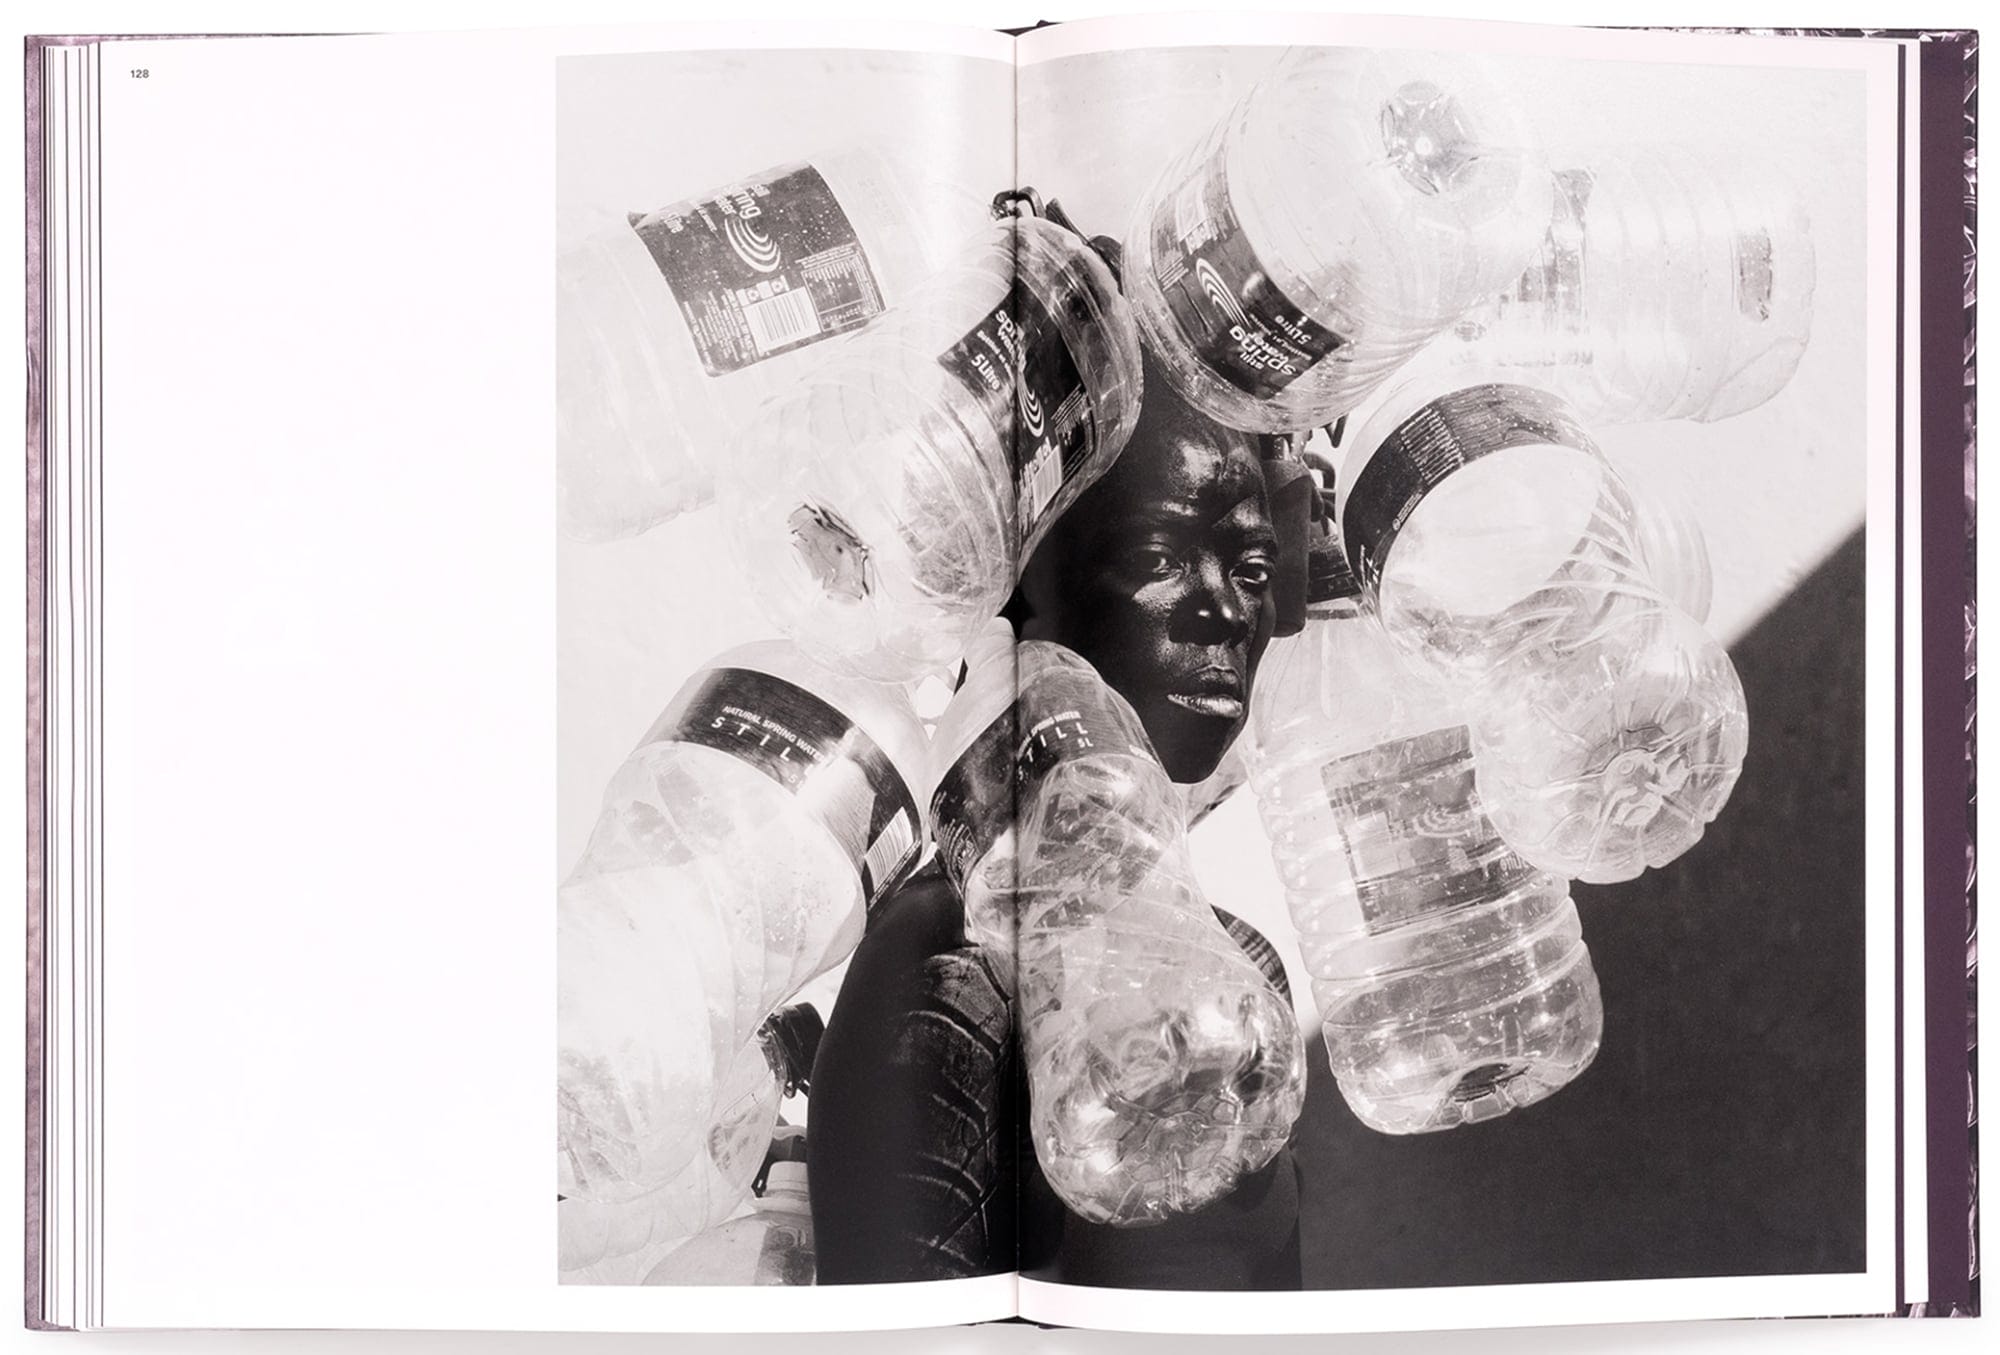 an open book spread with an image of the artist surrounded by water jugs